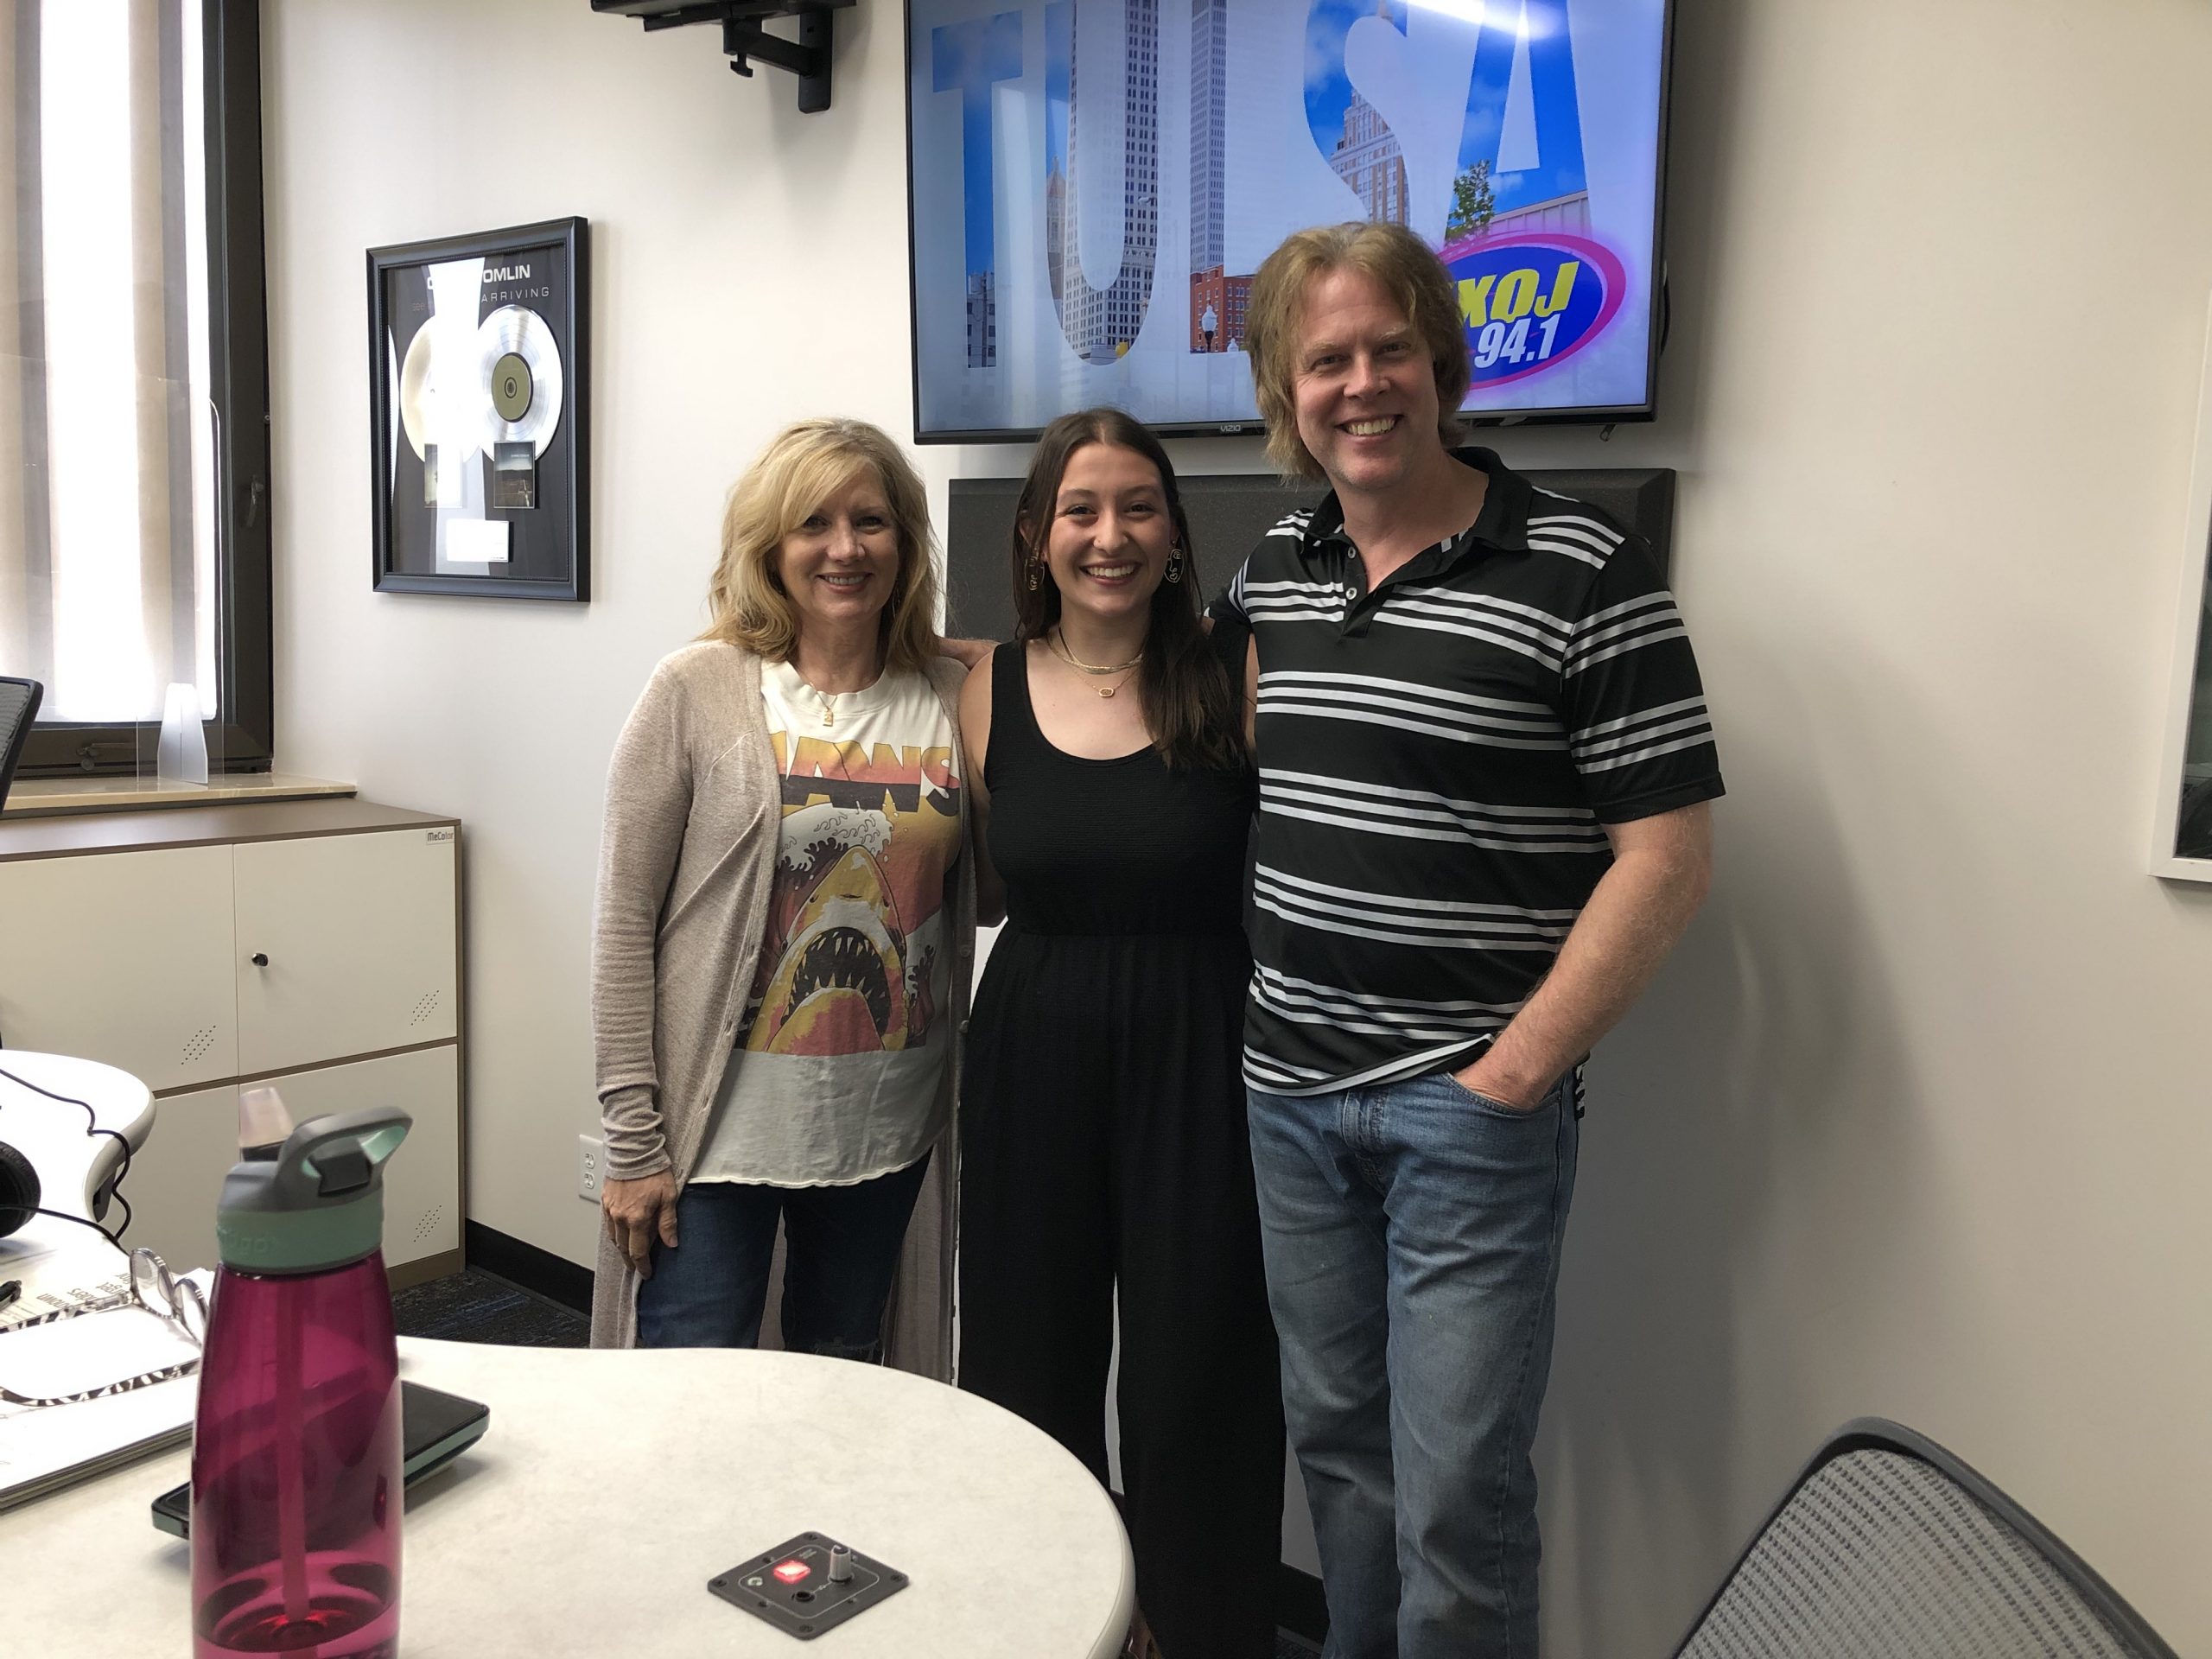 Hear from Kailey Abel on the air with Dave and Katie!